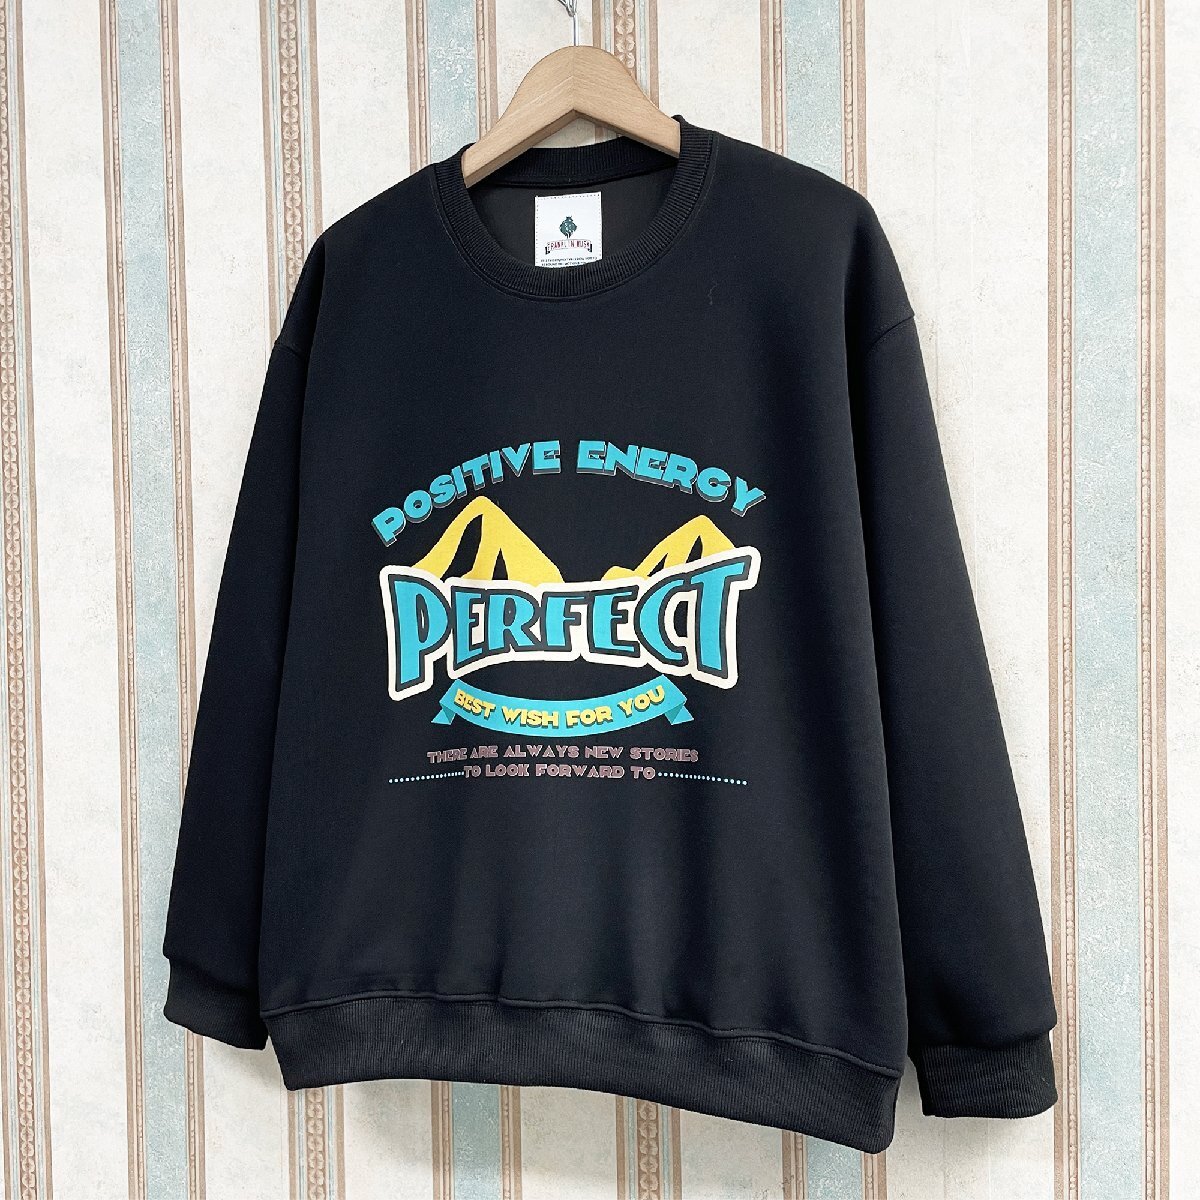  standard regular price 4 ten thousand FRANKLIN MUSK* America * New York departure sweatshirt on goods piece . cotton 100% soft britain character pattern American Casual pull over everyday size 3